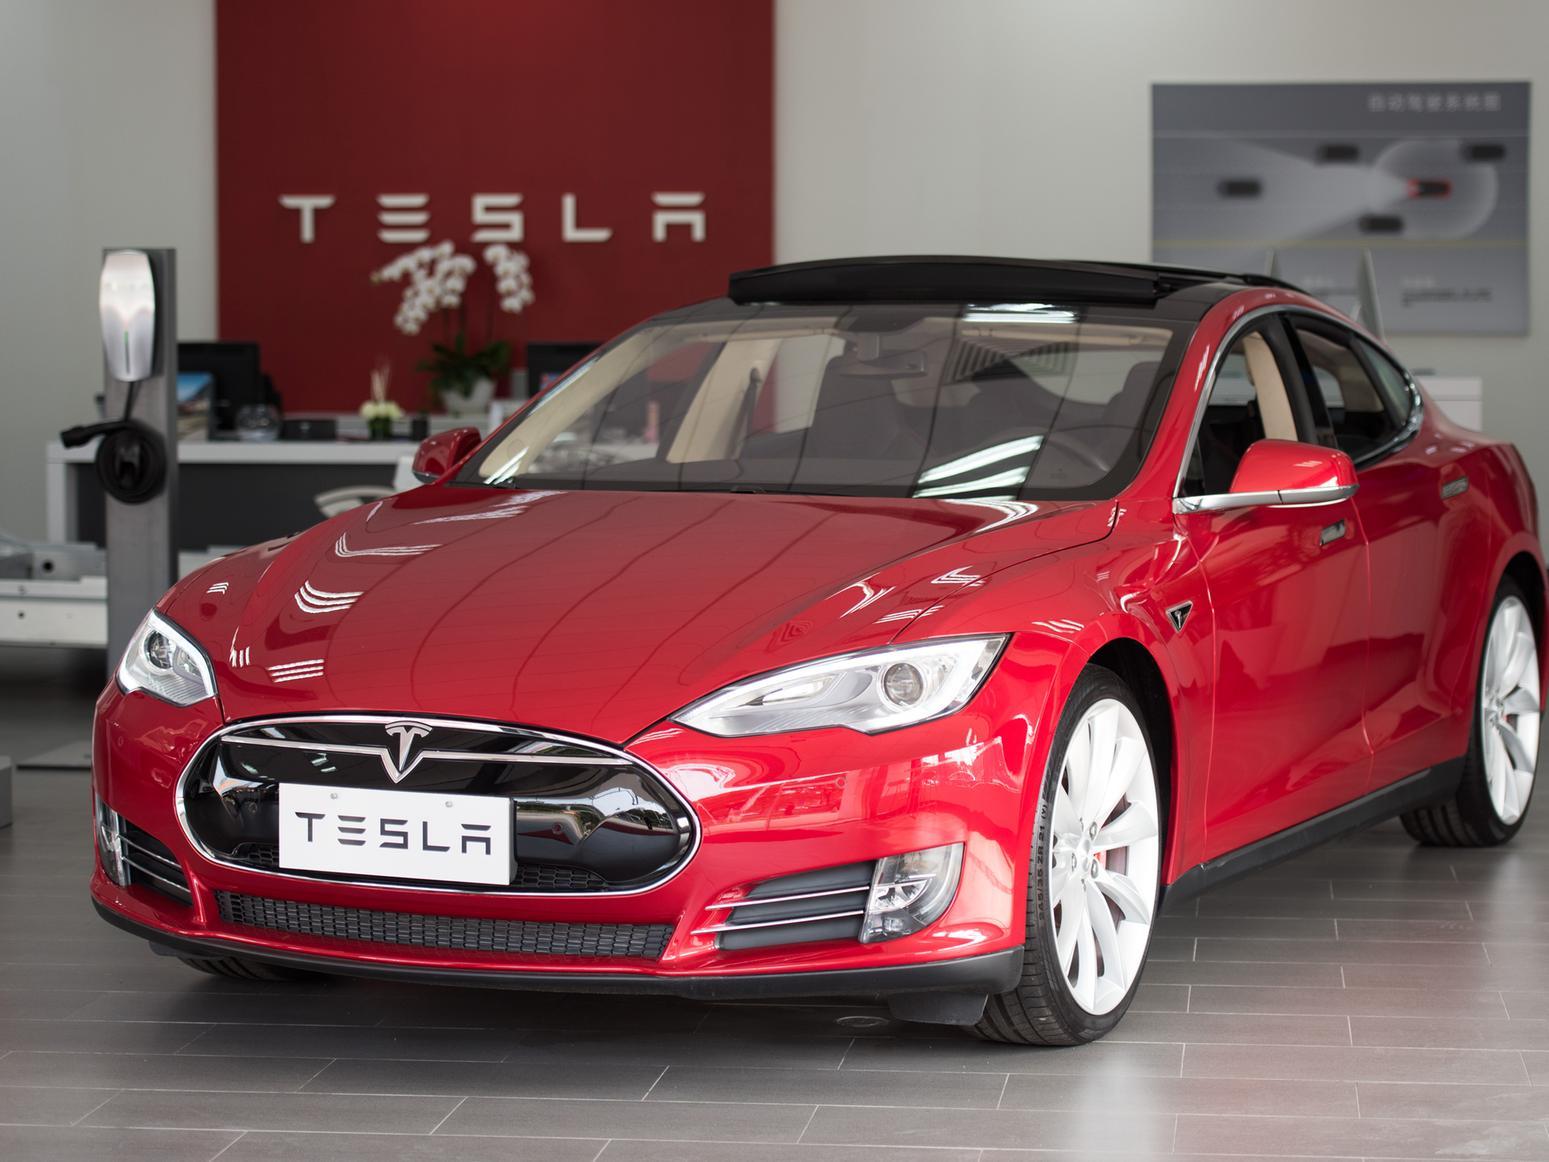 The watershed vehicle for modern electric cars, the Model S also announced Tesla as a major name in not just the car industry, but technology as well. The range and speed it offered in an electric car had never been seen before on this scale.